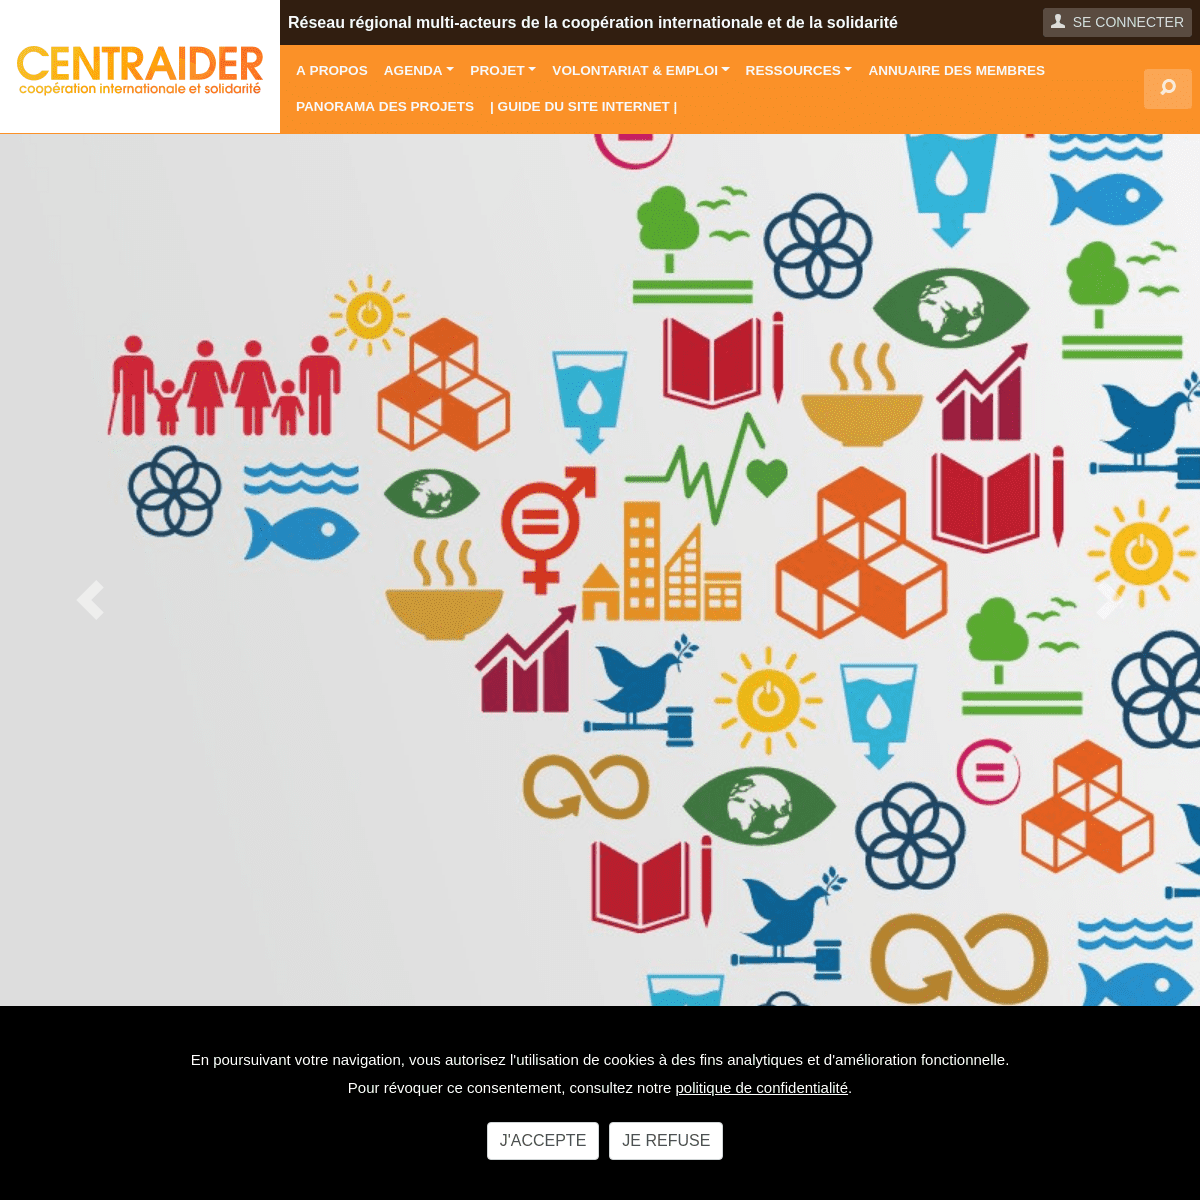 A complete backup of centraider.org